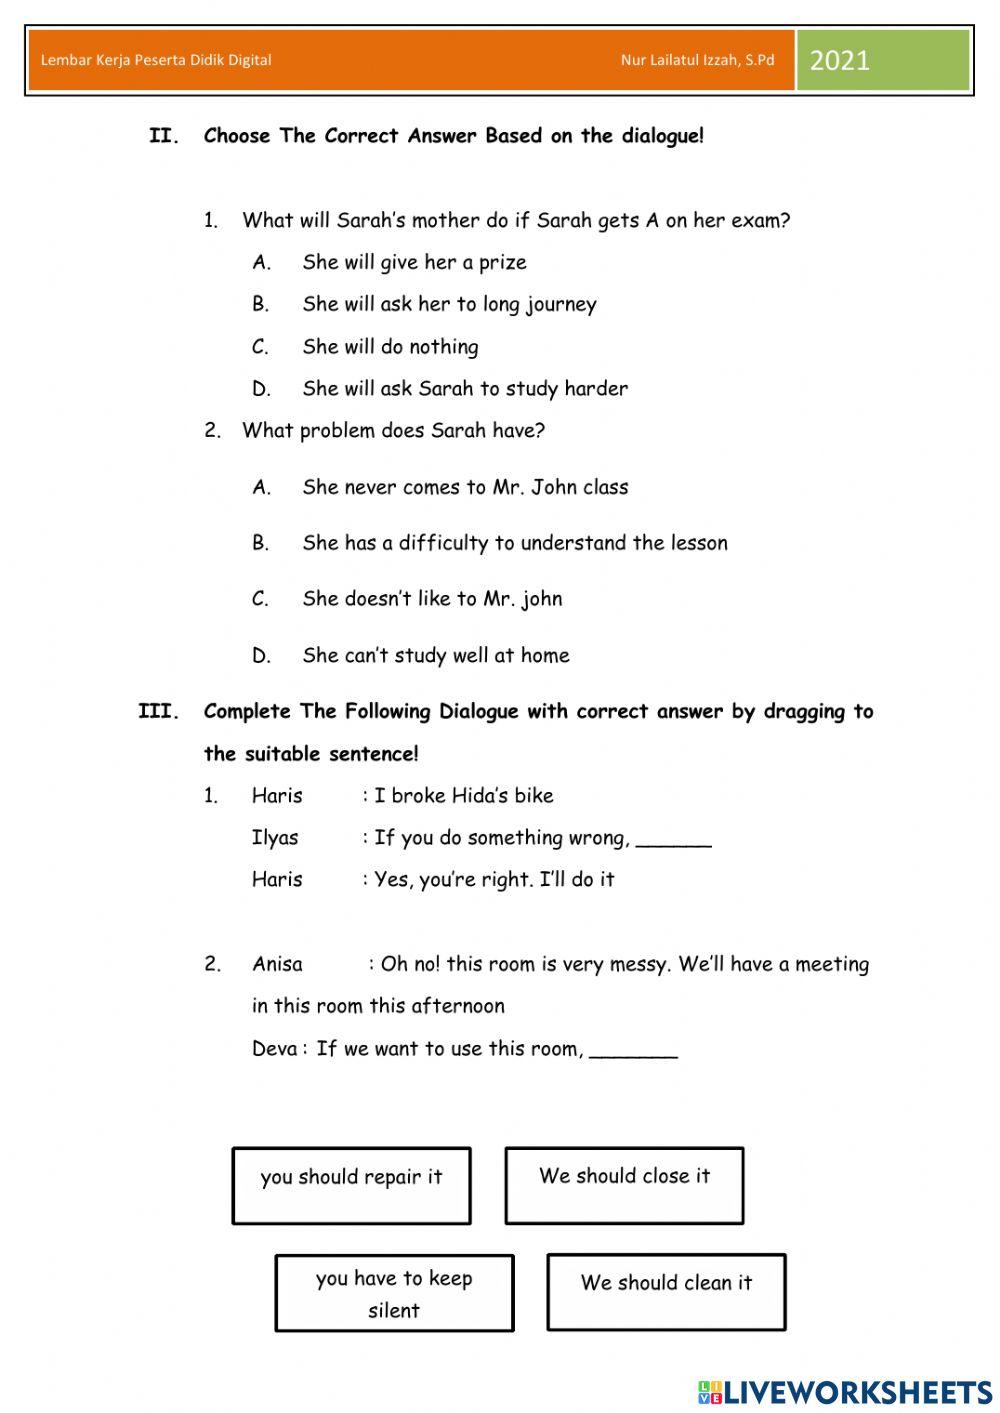 LKPD Bahasa Inggris-If Clause, Suggestion